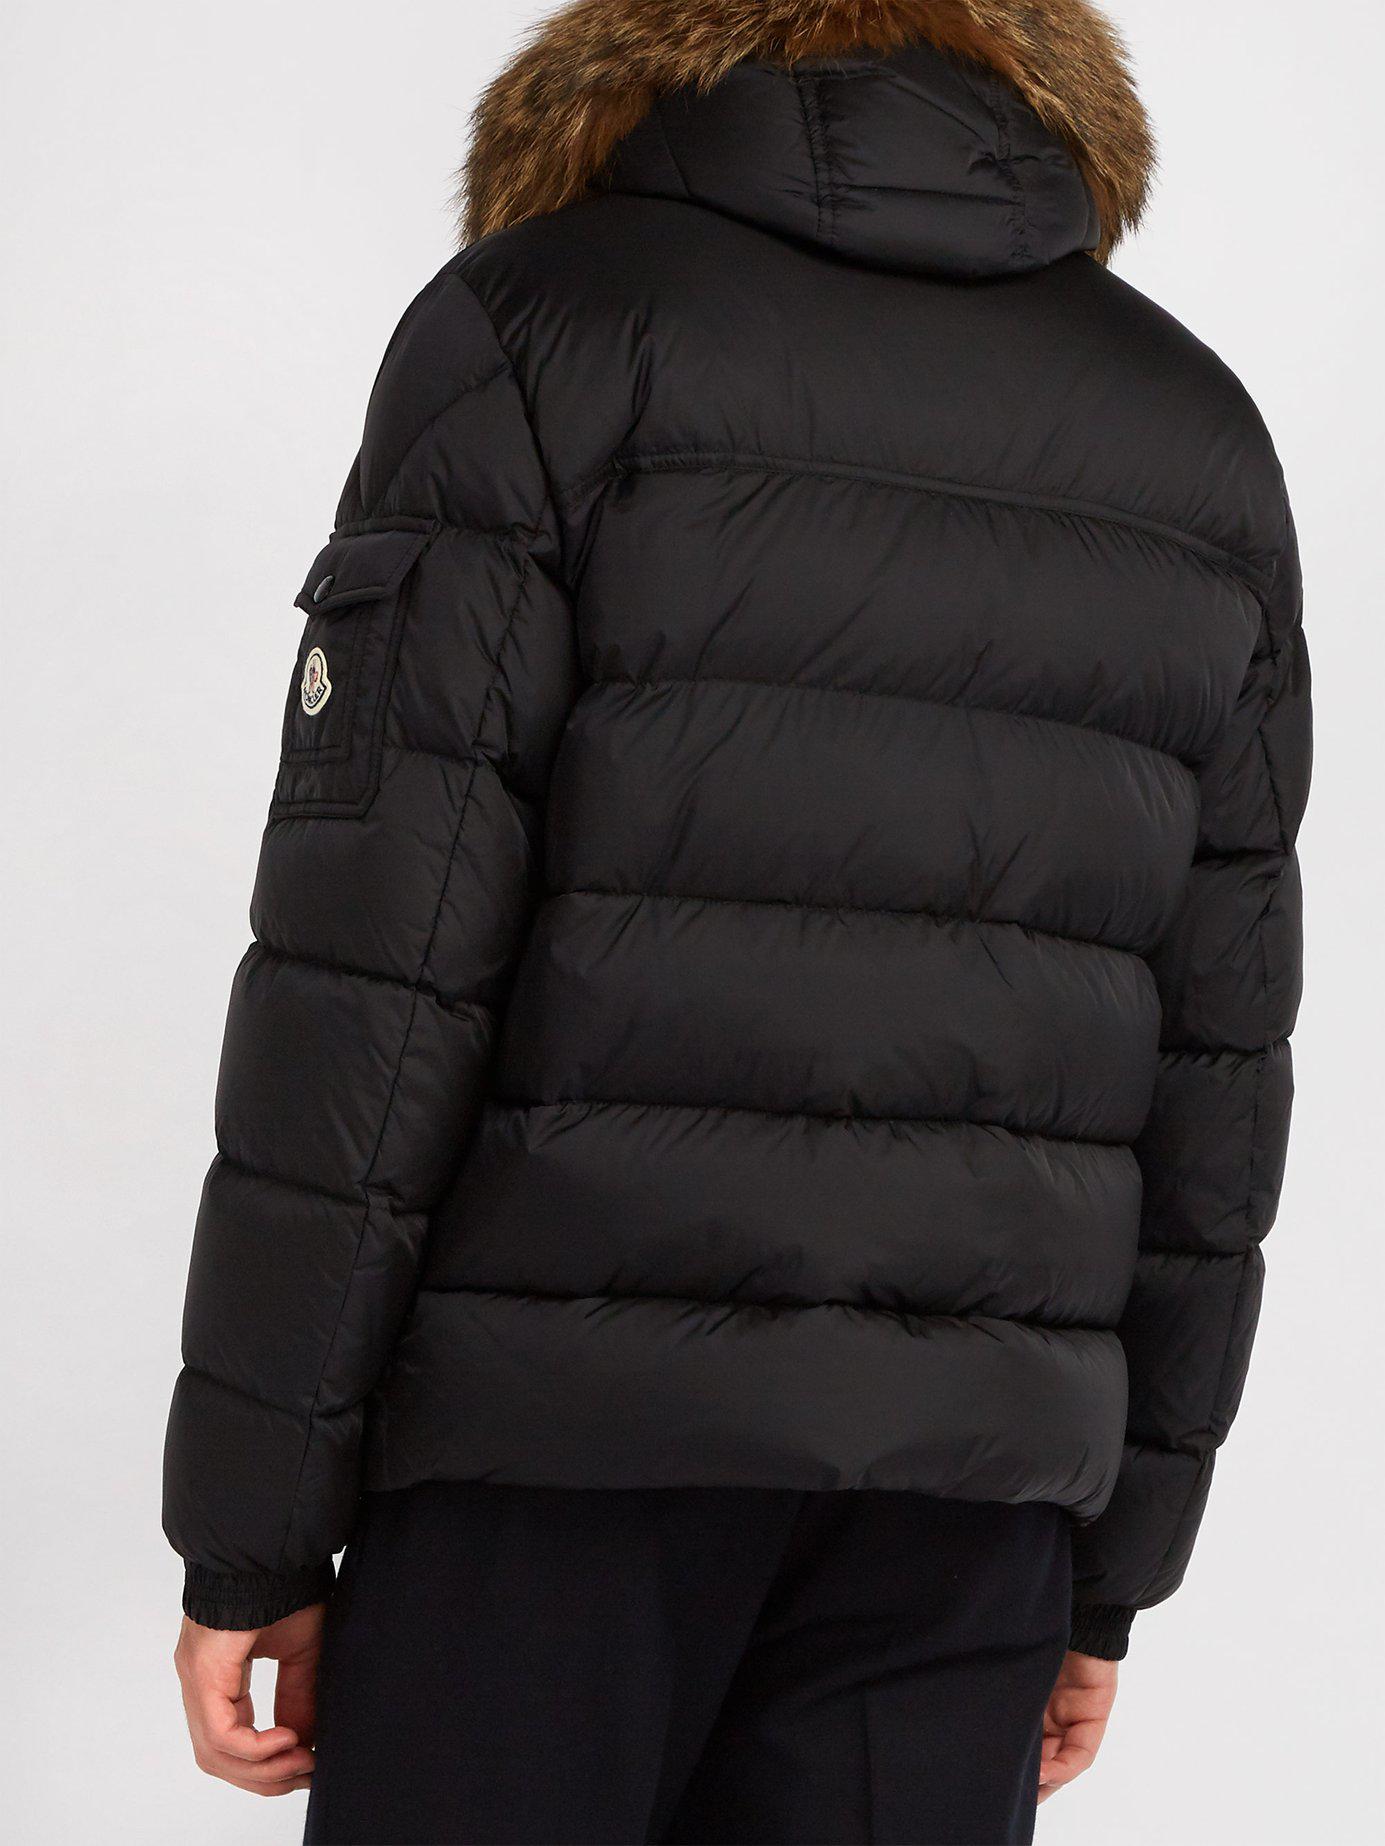 Moncler Synthetic Marque Quilted-down Jacket in Black for Men - Lyst